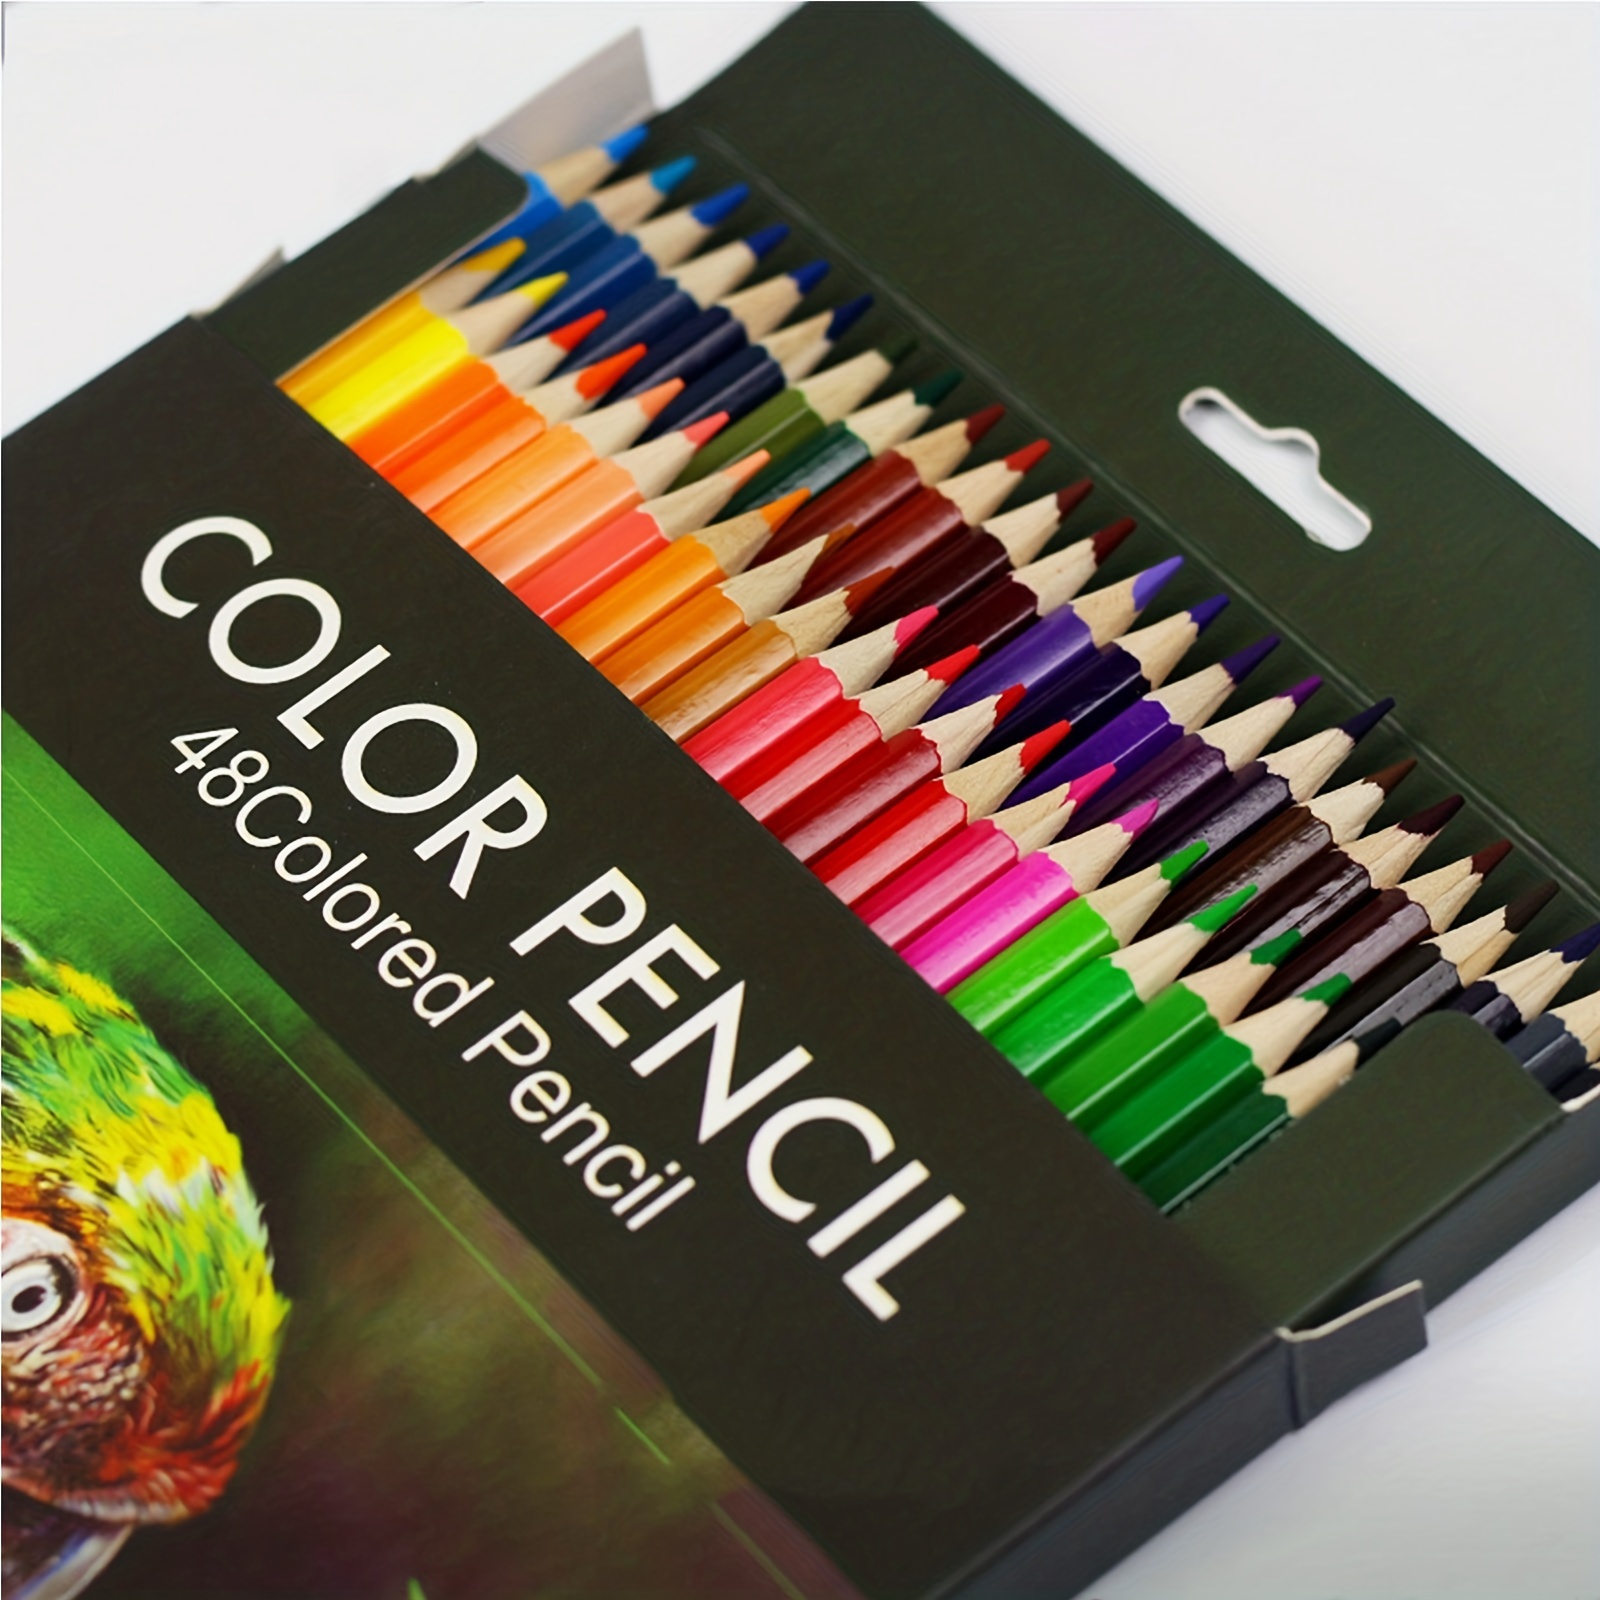 72 150 Prismacolor Colored Pencils, Shuttle Art Soft Core Color Pencil Set  Adult Coloring Book Artist Drawing Sketching Crafting